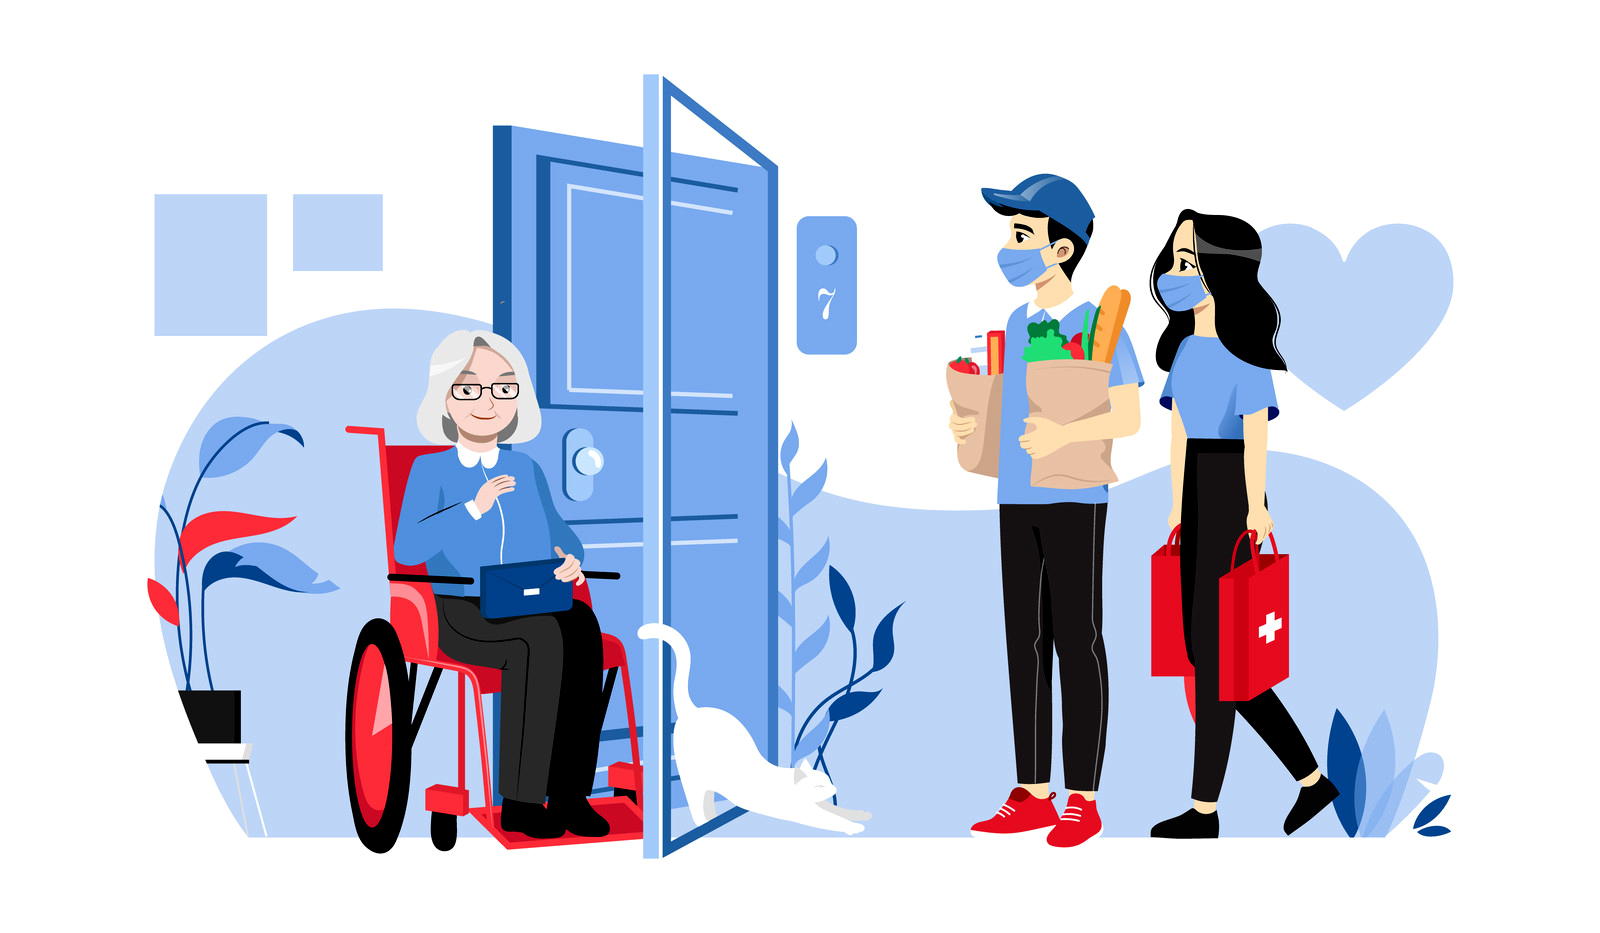 Illustration of two people delivering groceries to an older woman in a wheelchair.